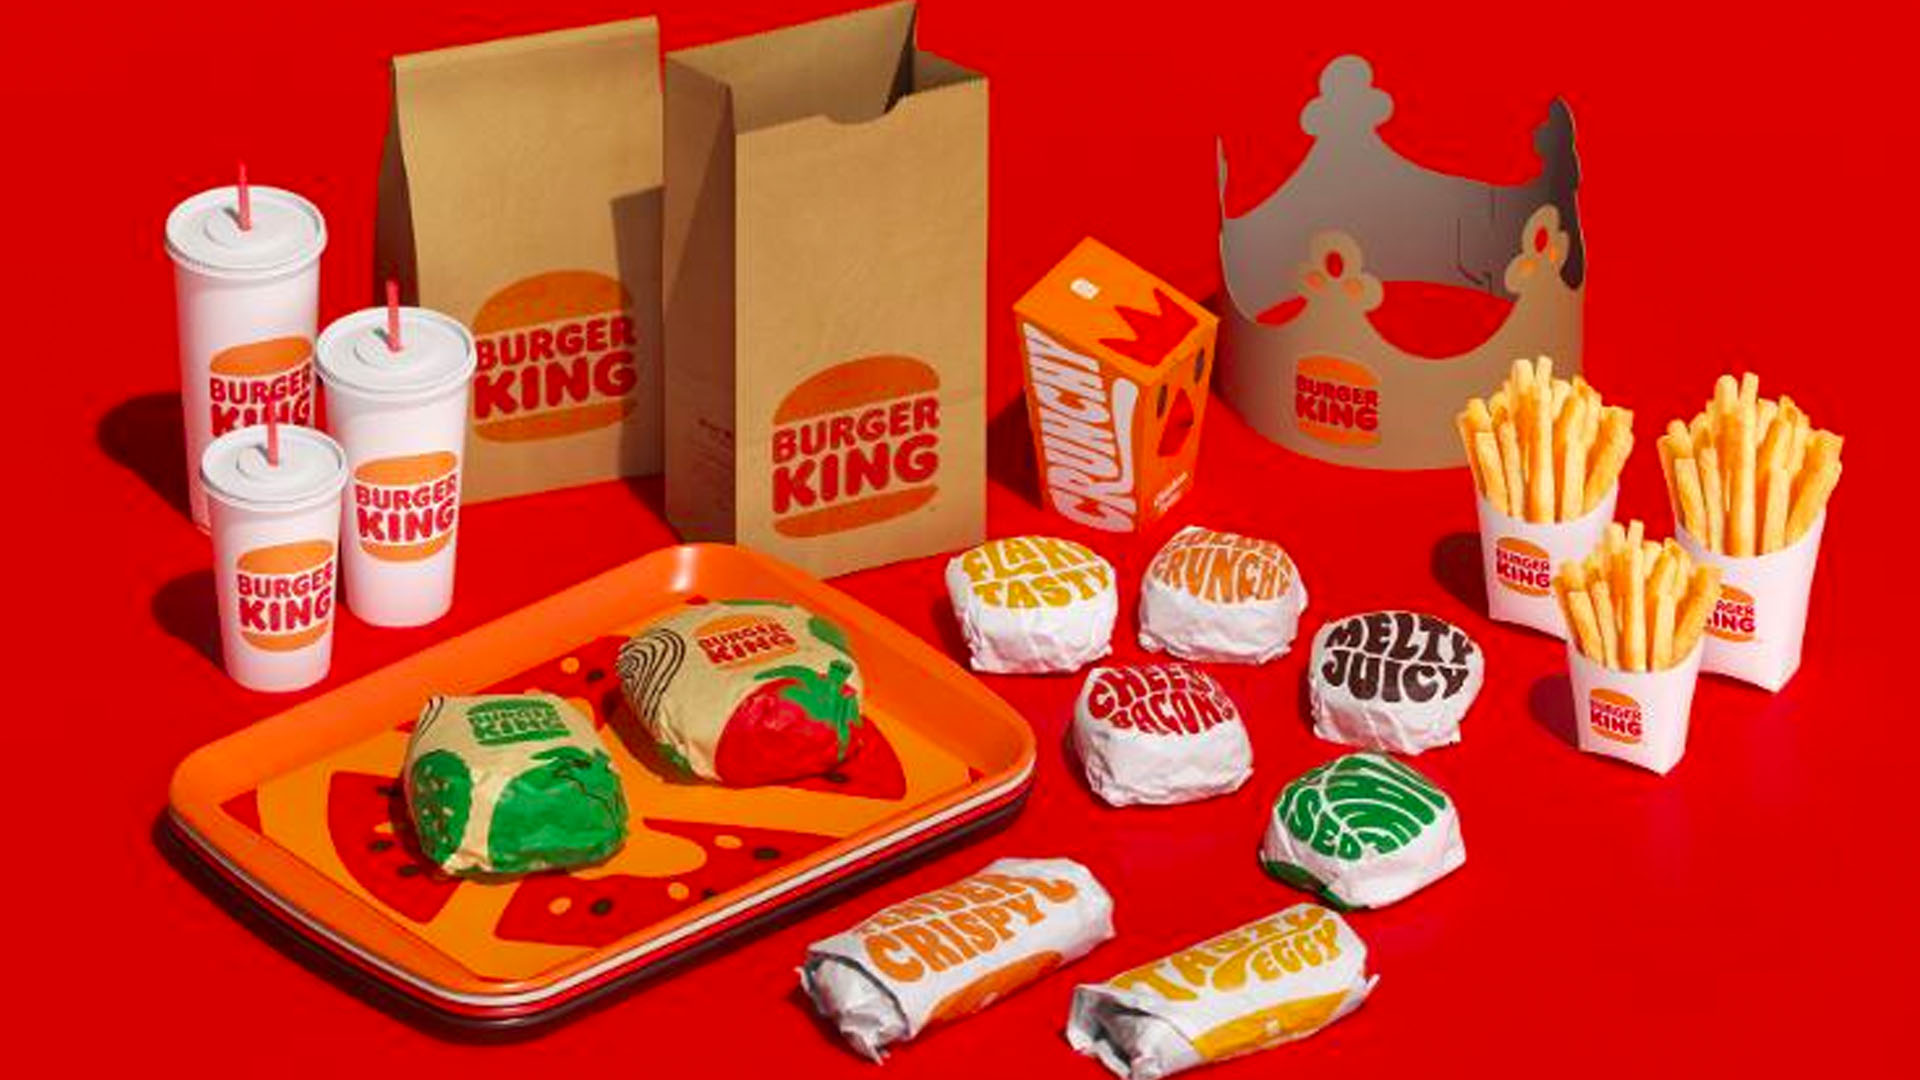 This is what Burger King’s sustainable new packaging looks like